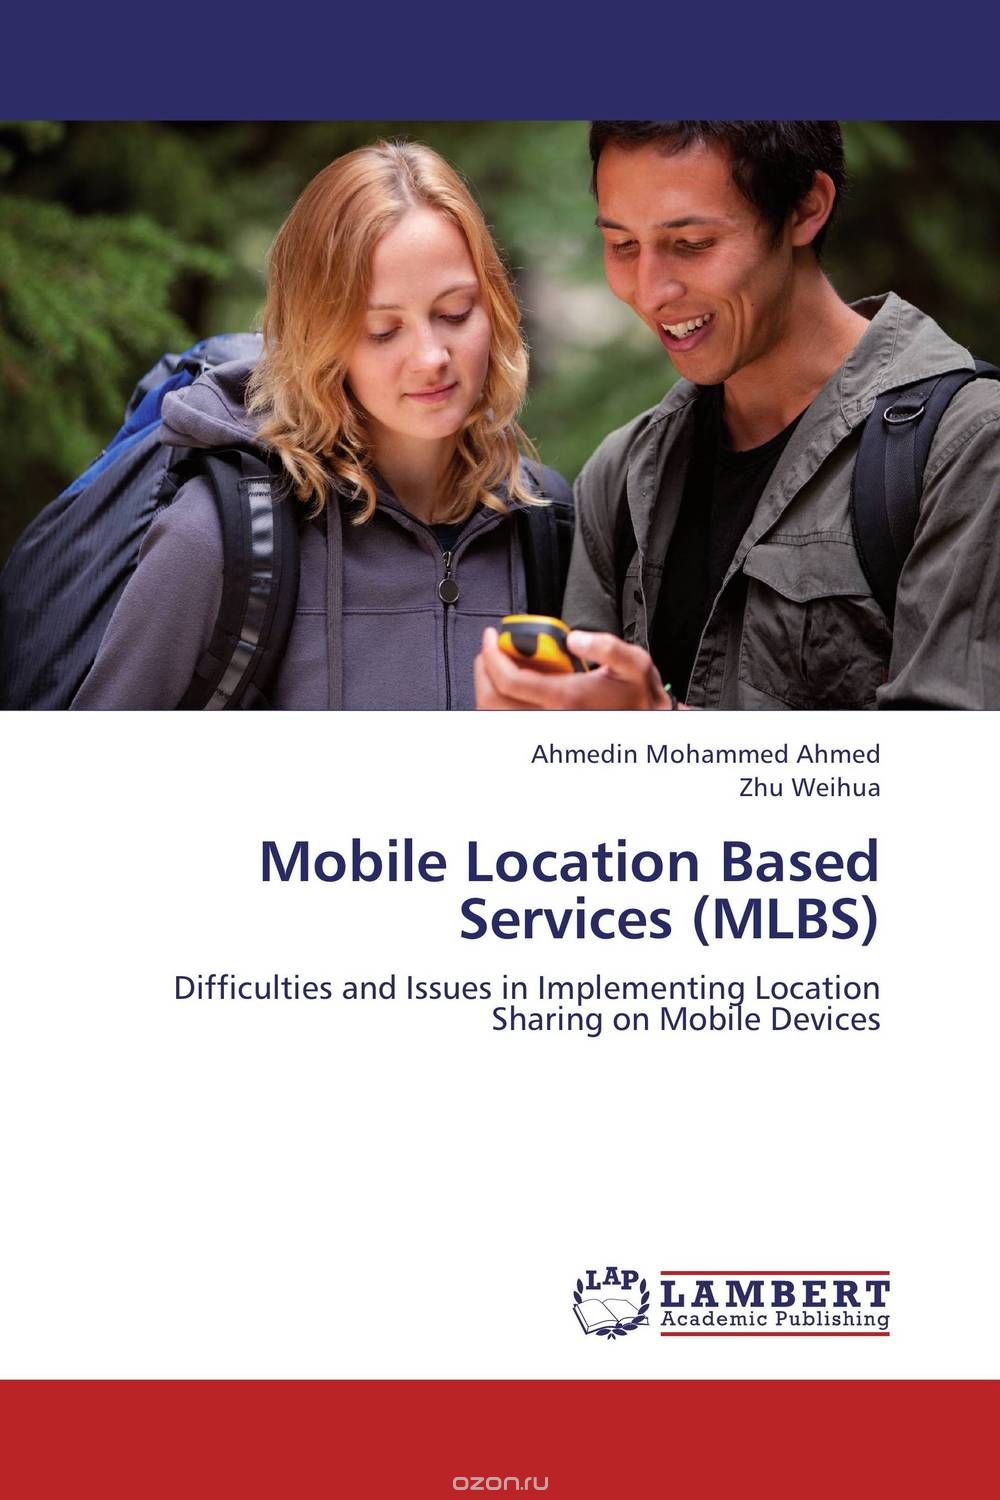 Mobile Location Based Services (MLBS)